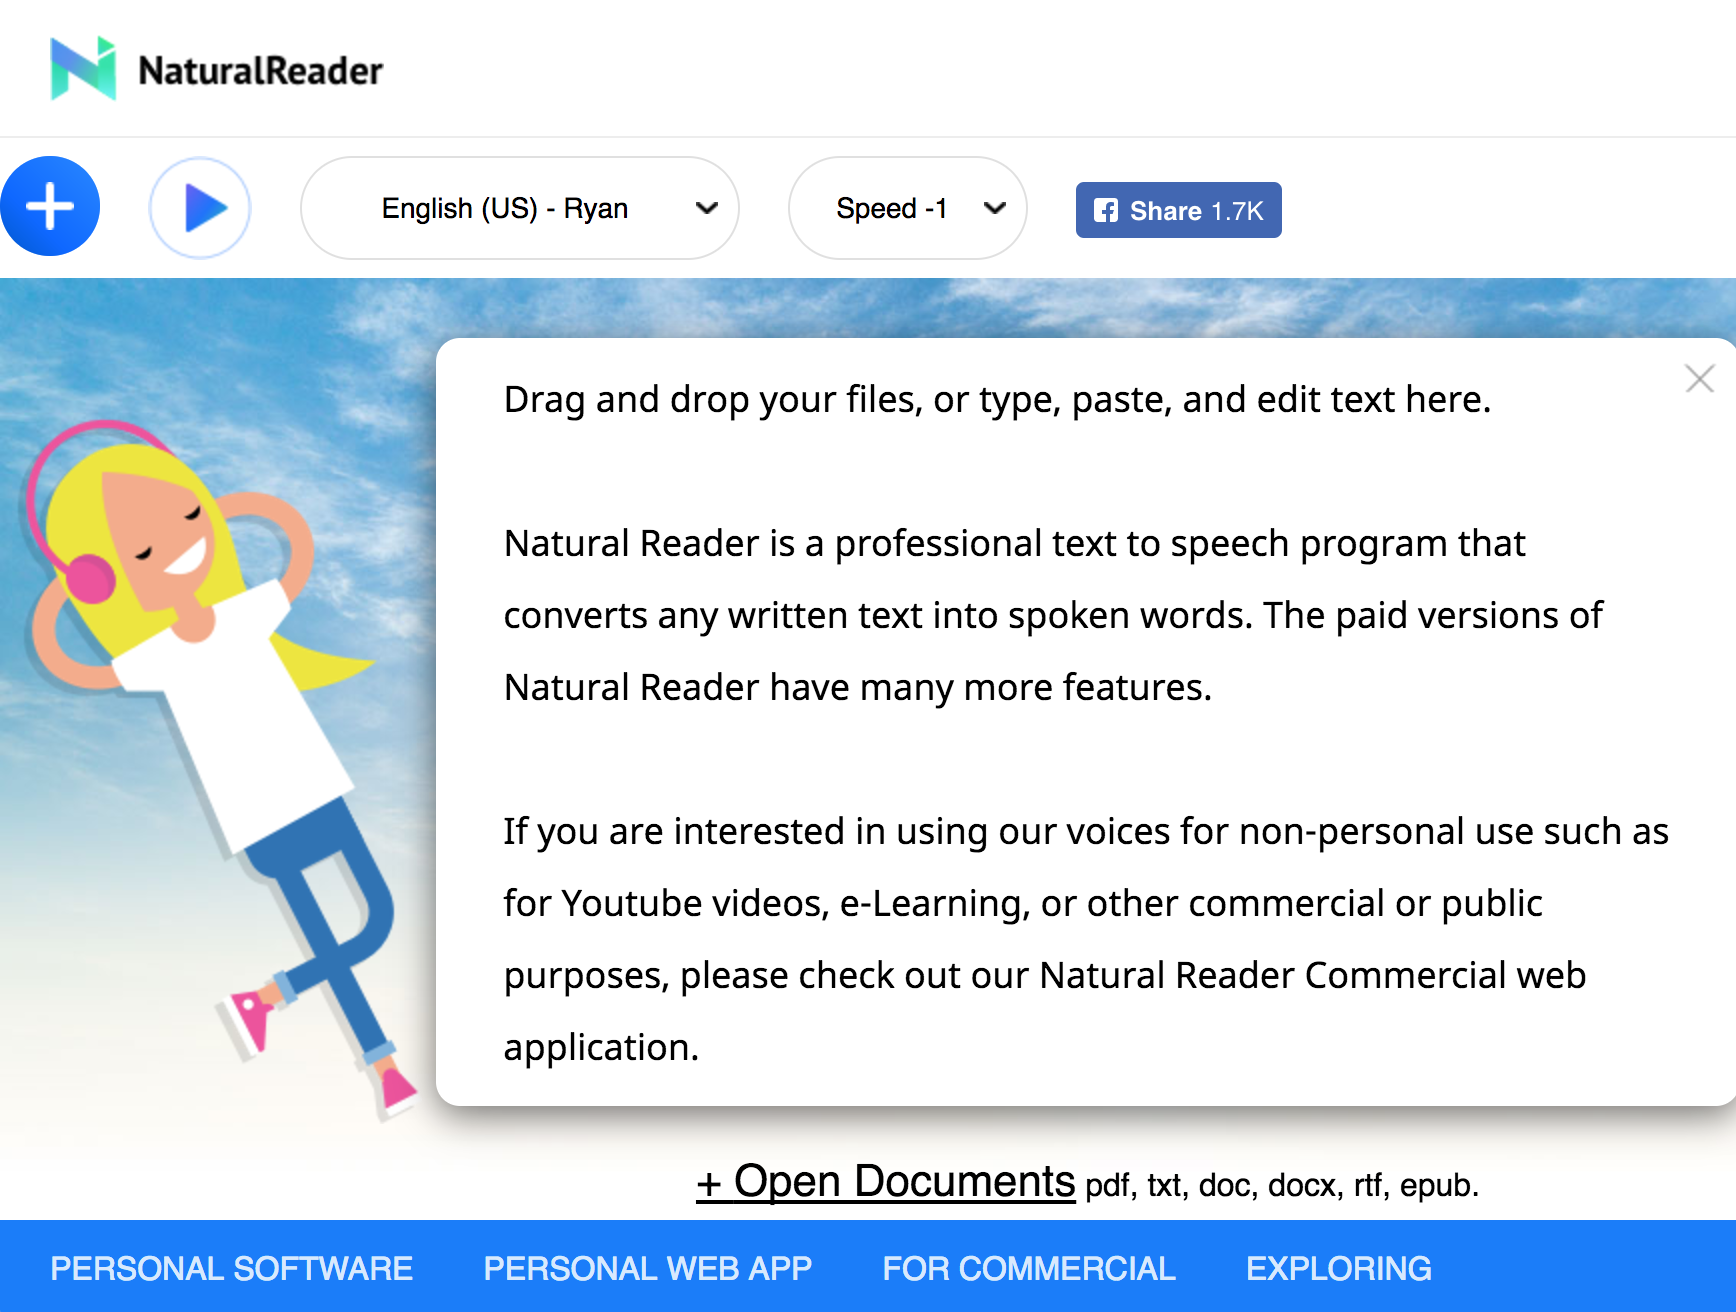 Natural Reader and other free text-to-speech tools